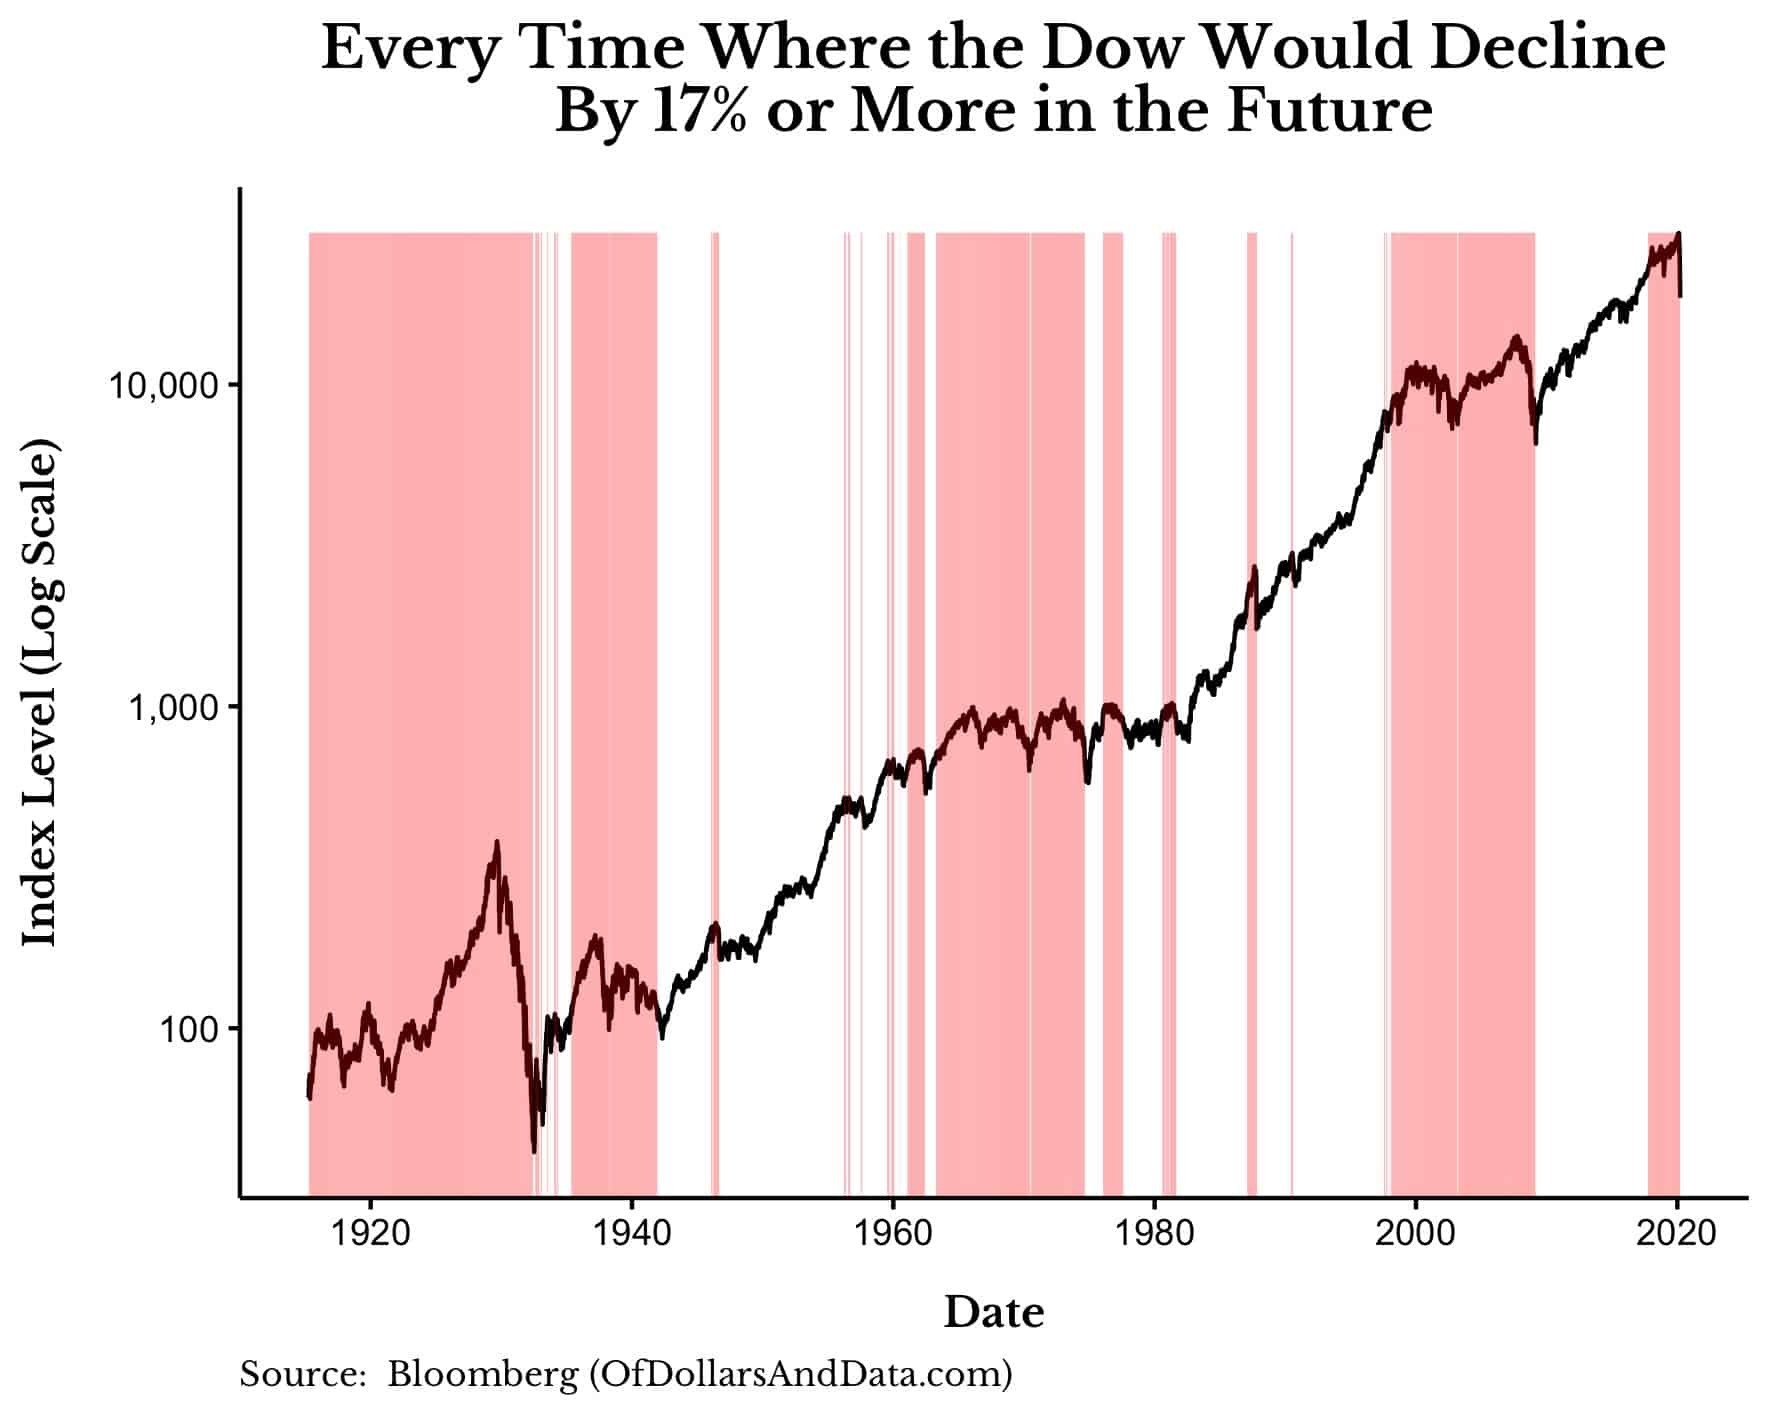 The Dow Jones Industrial Average and every time it would decline by 17% or more in its future.